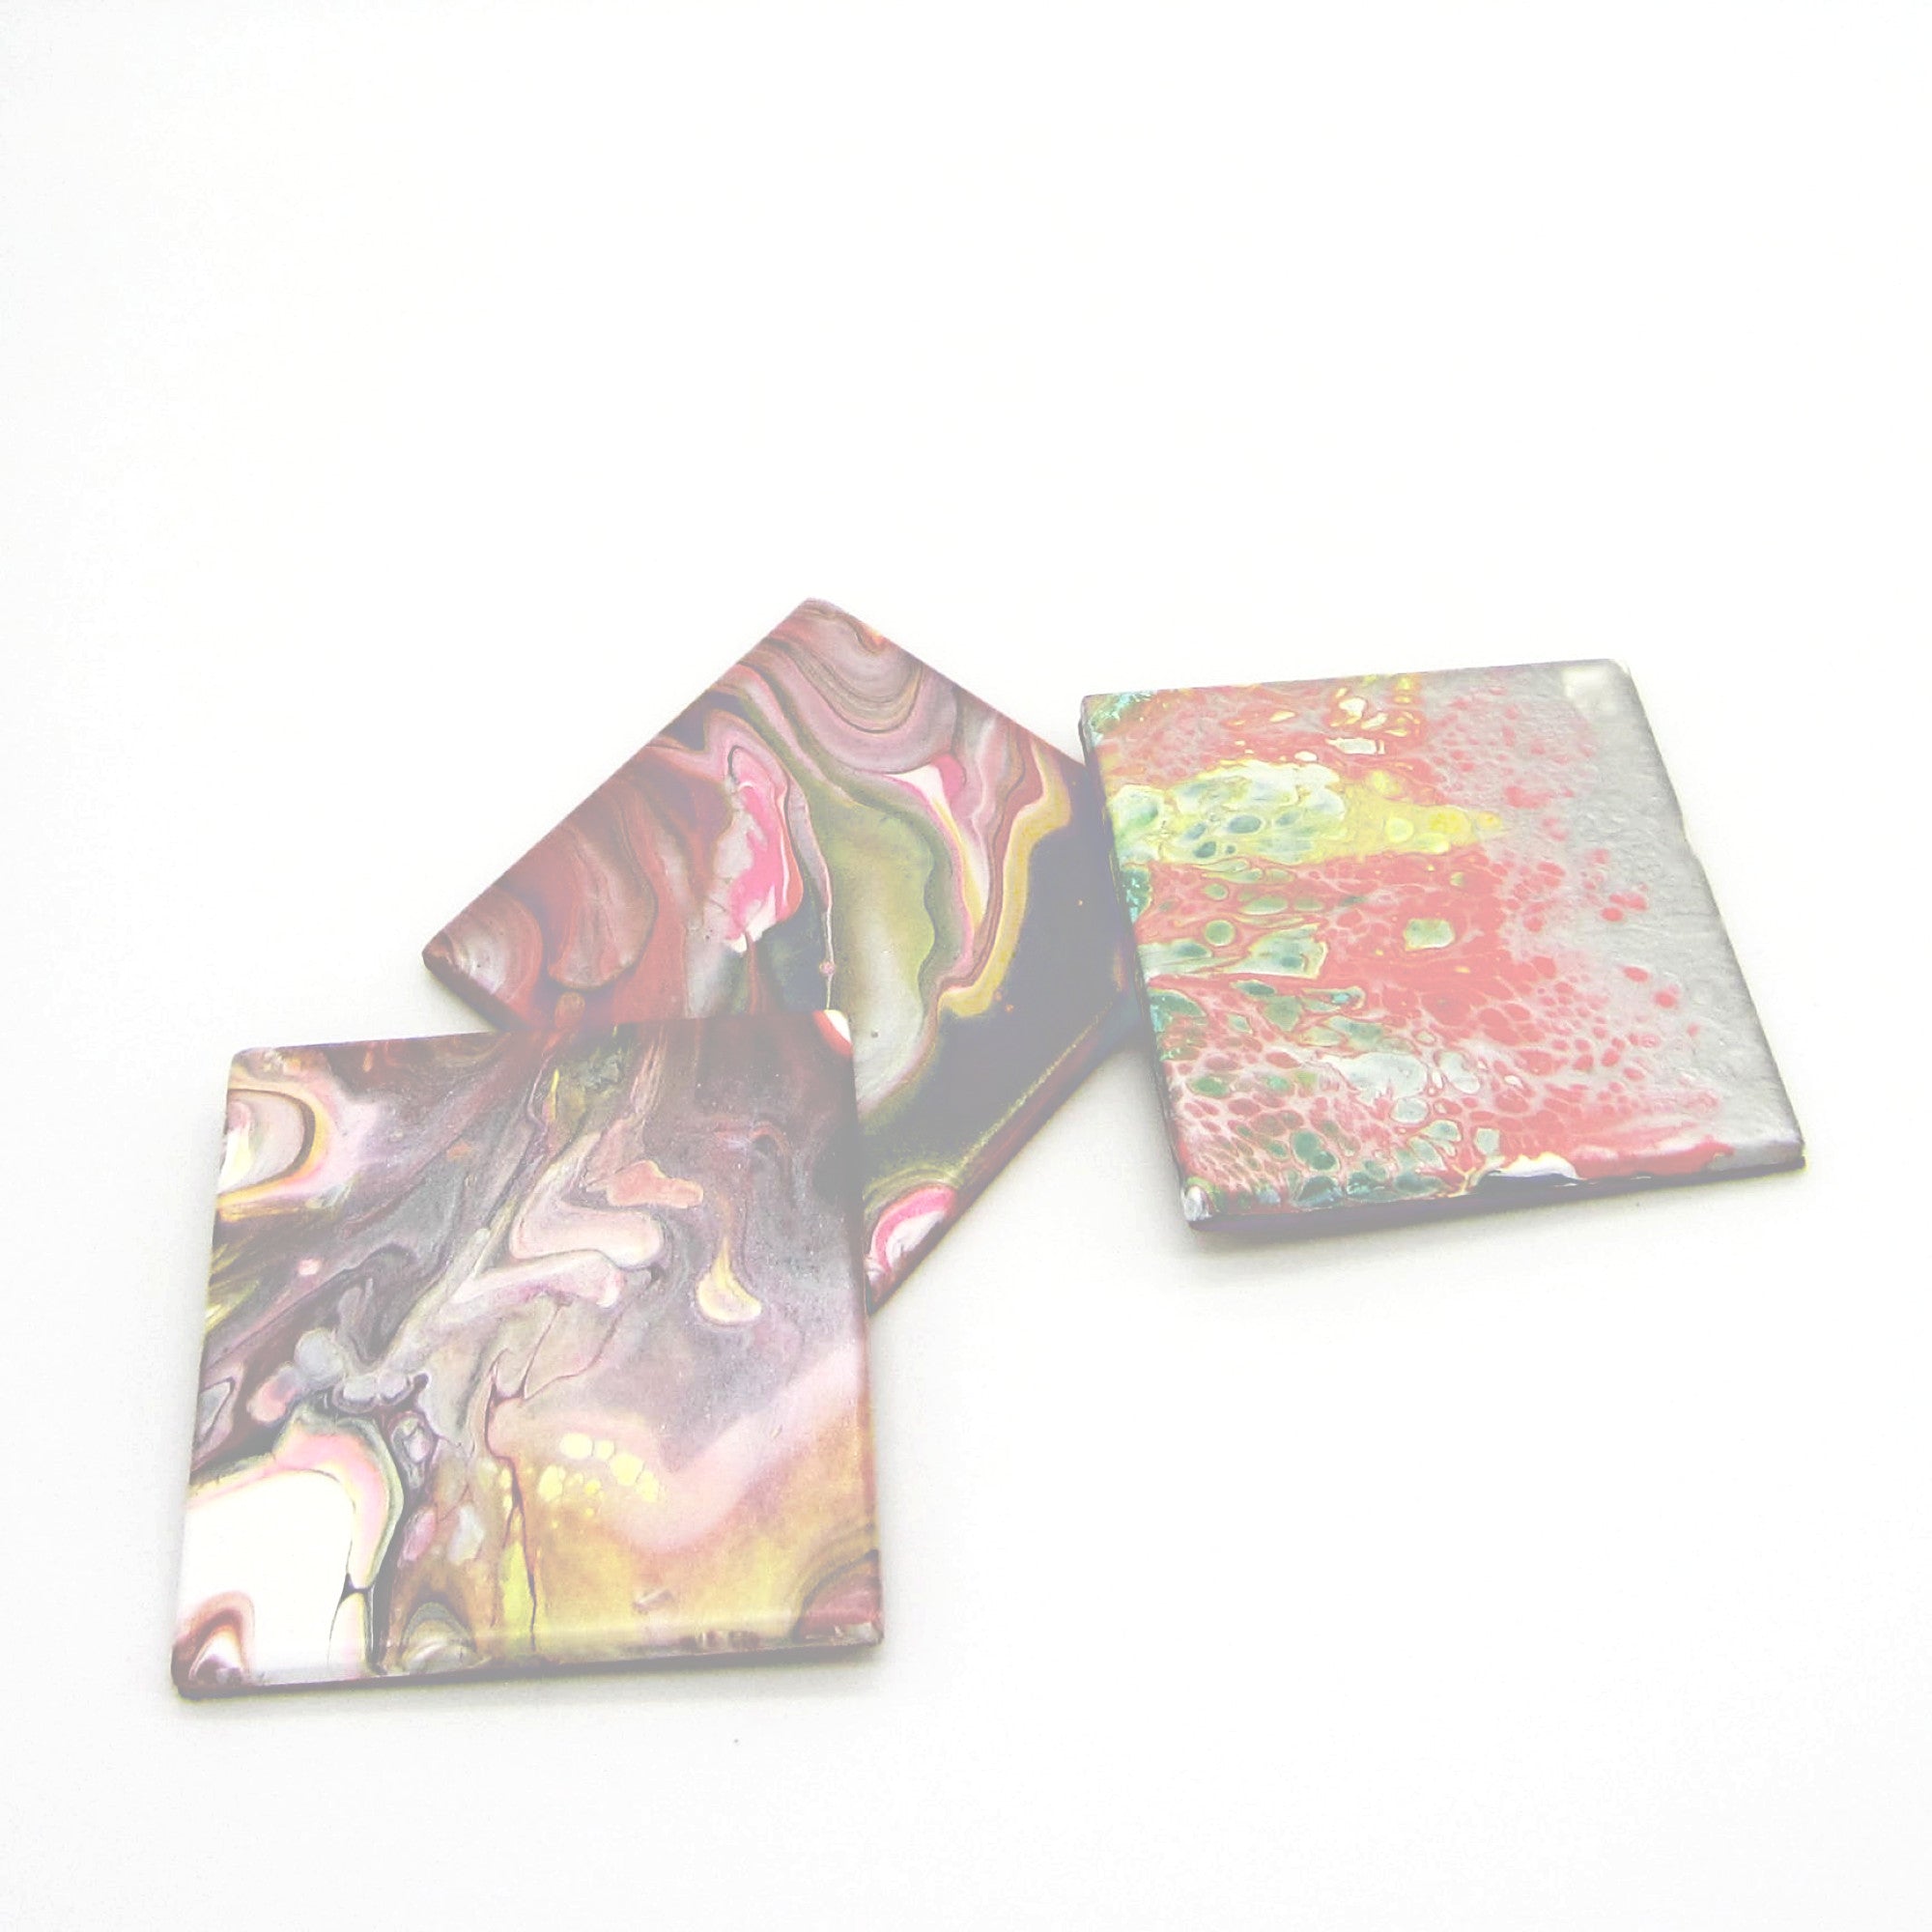 Hand Painted Coaster Set of 3 in Pink, Gray, Silver